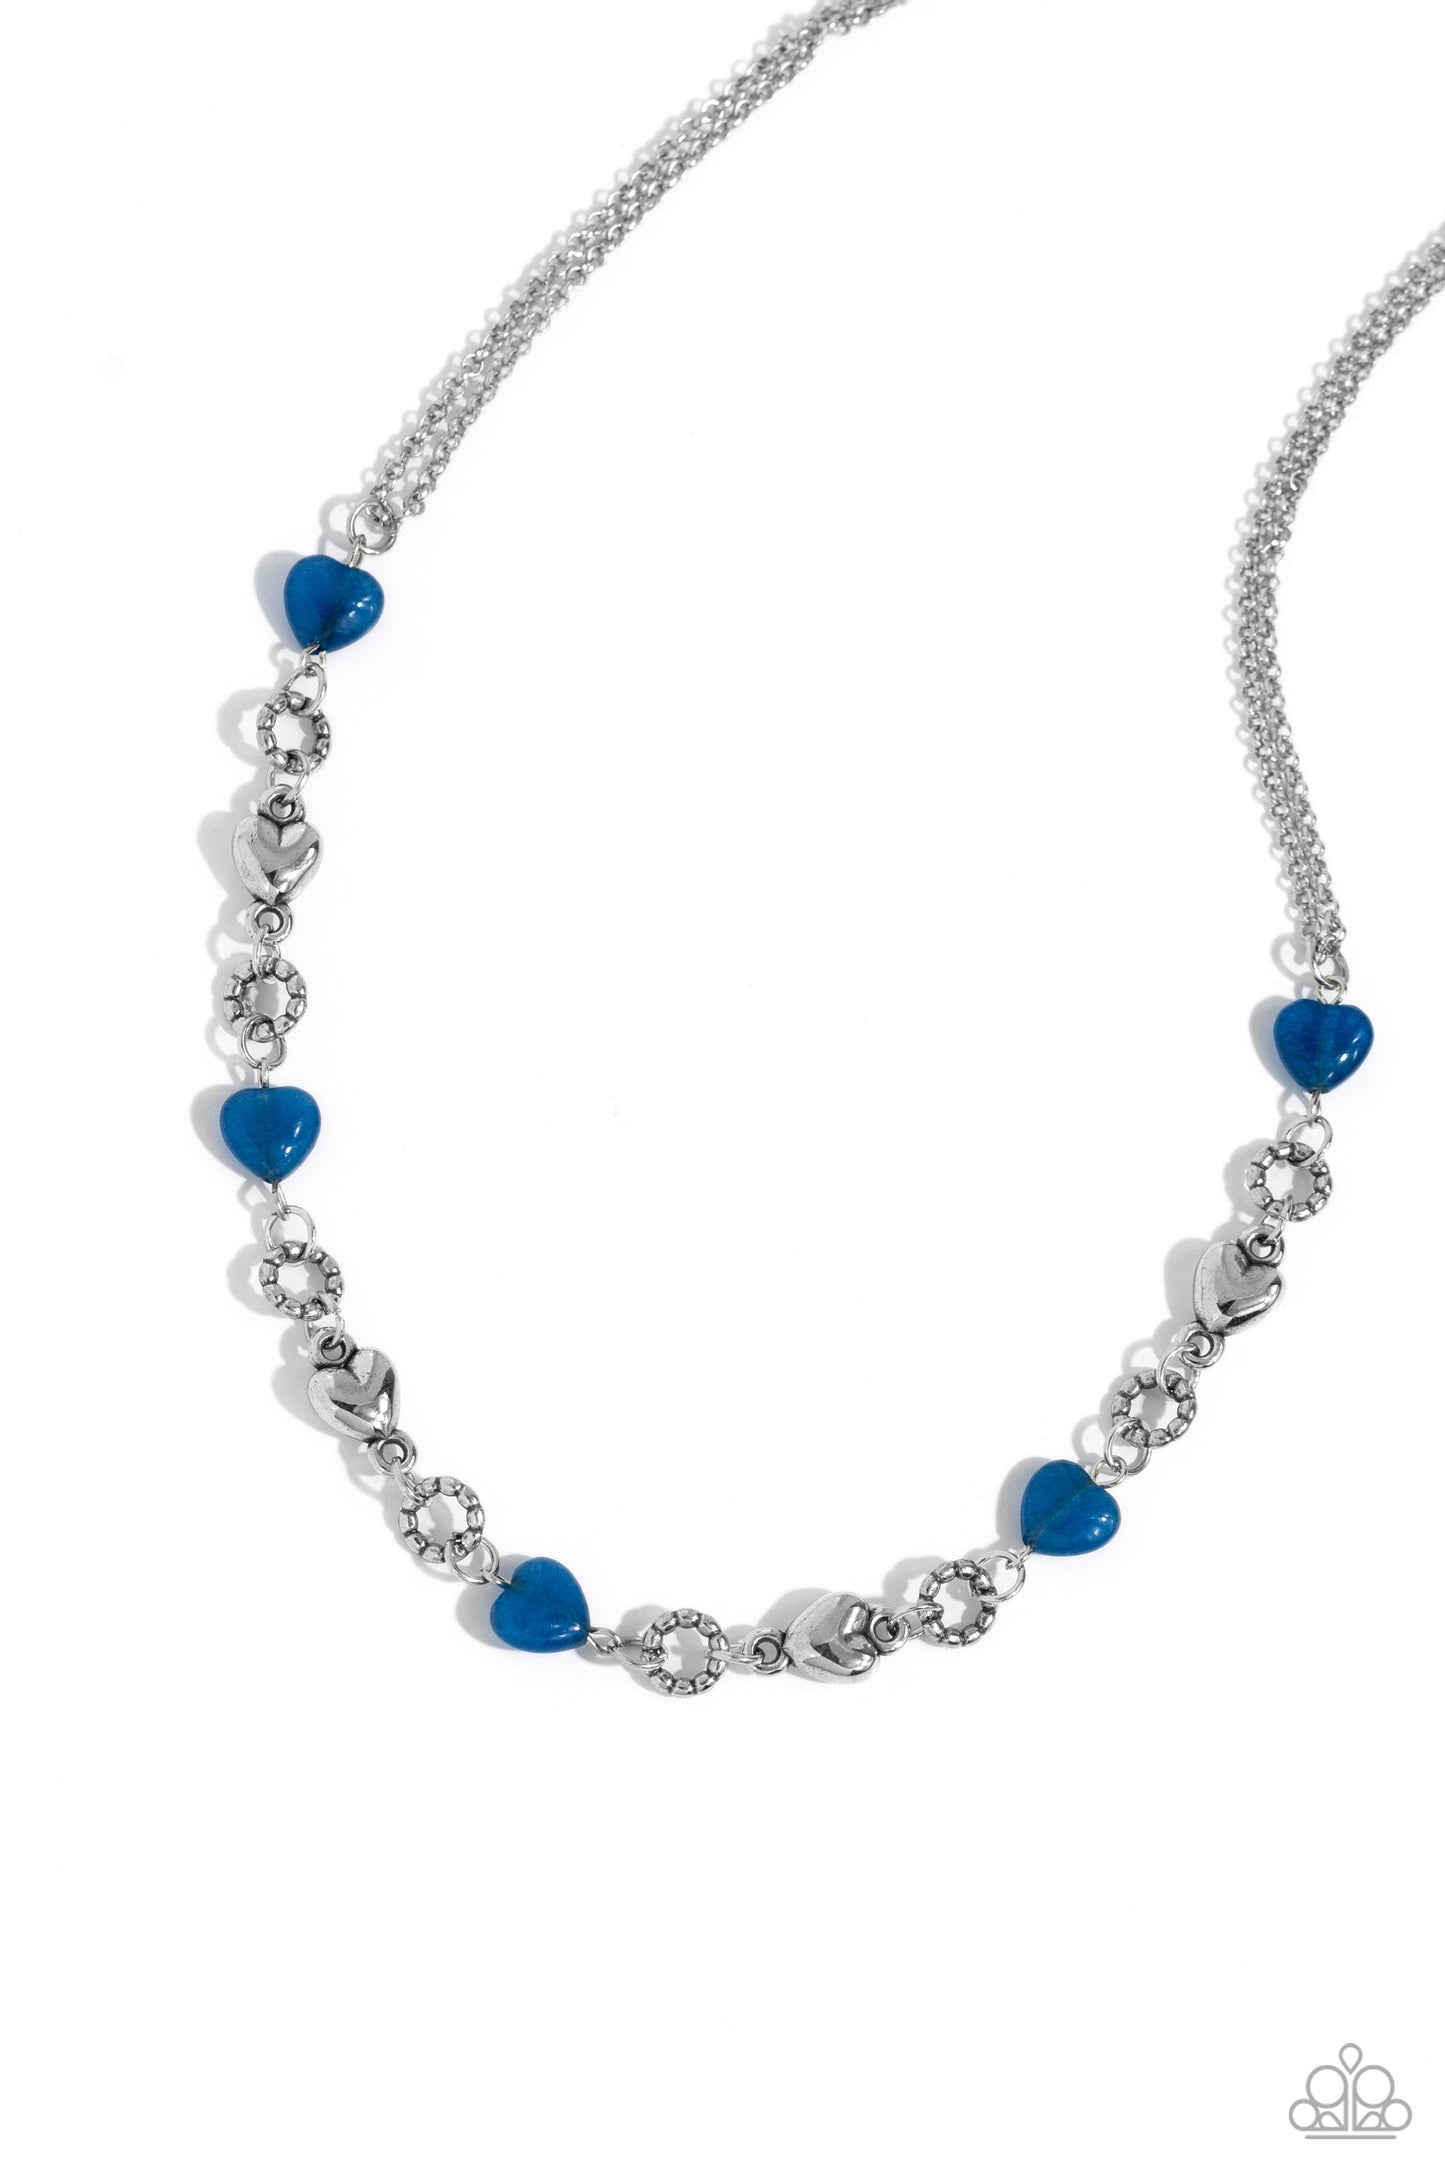 My HEARTBEAT Will Go On - Blue and Silver Necklace - Paparazzi Accessories - Heart-shaped lapis stones and sleek silver hearts alternate along the neckline from a double strand of shimmery silver chains. Bubbly textured silver rings separate each heart shape infusing the romantically earthy design with a touch of high-sheen detail.